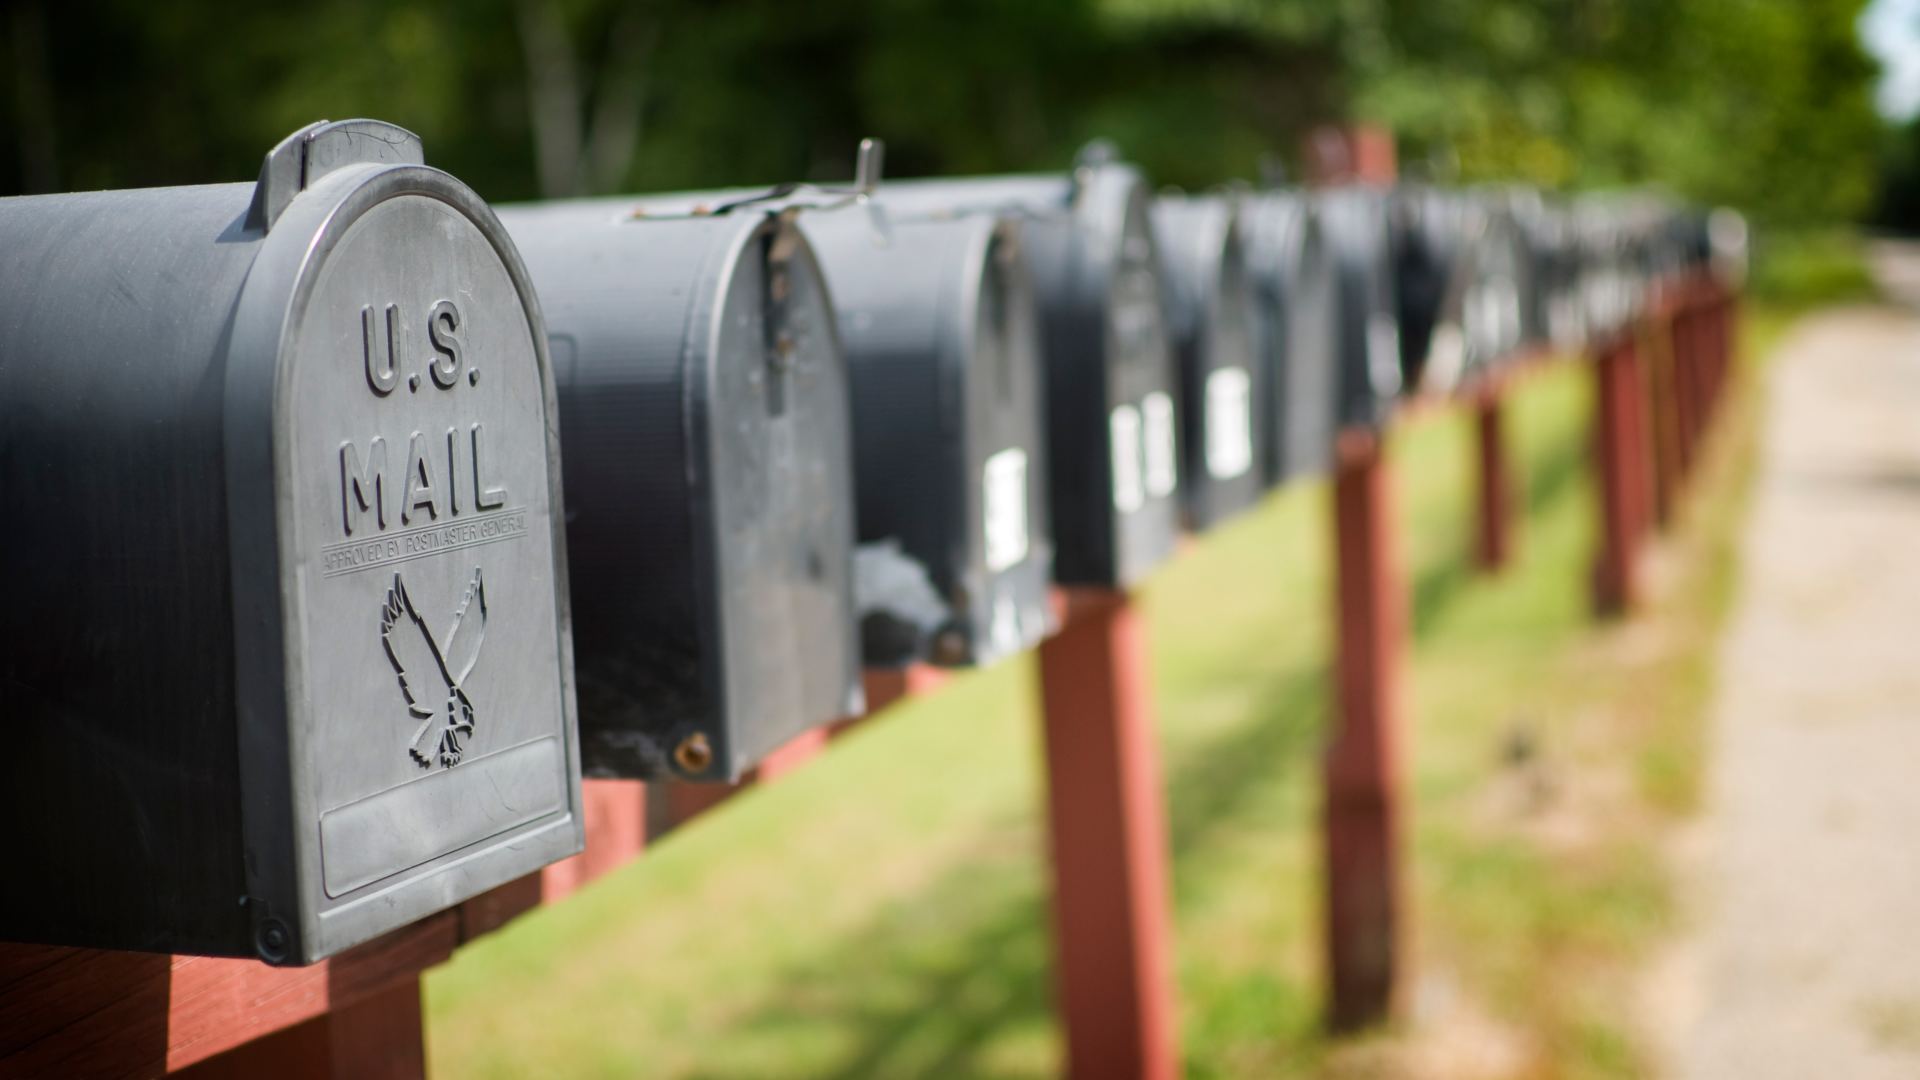 Mailboxes lined up